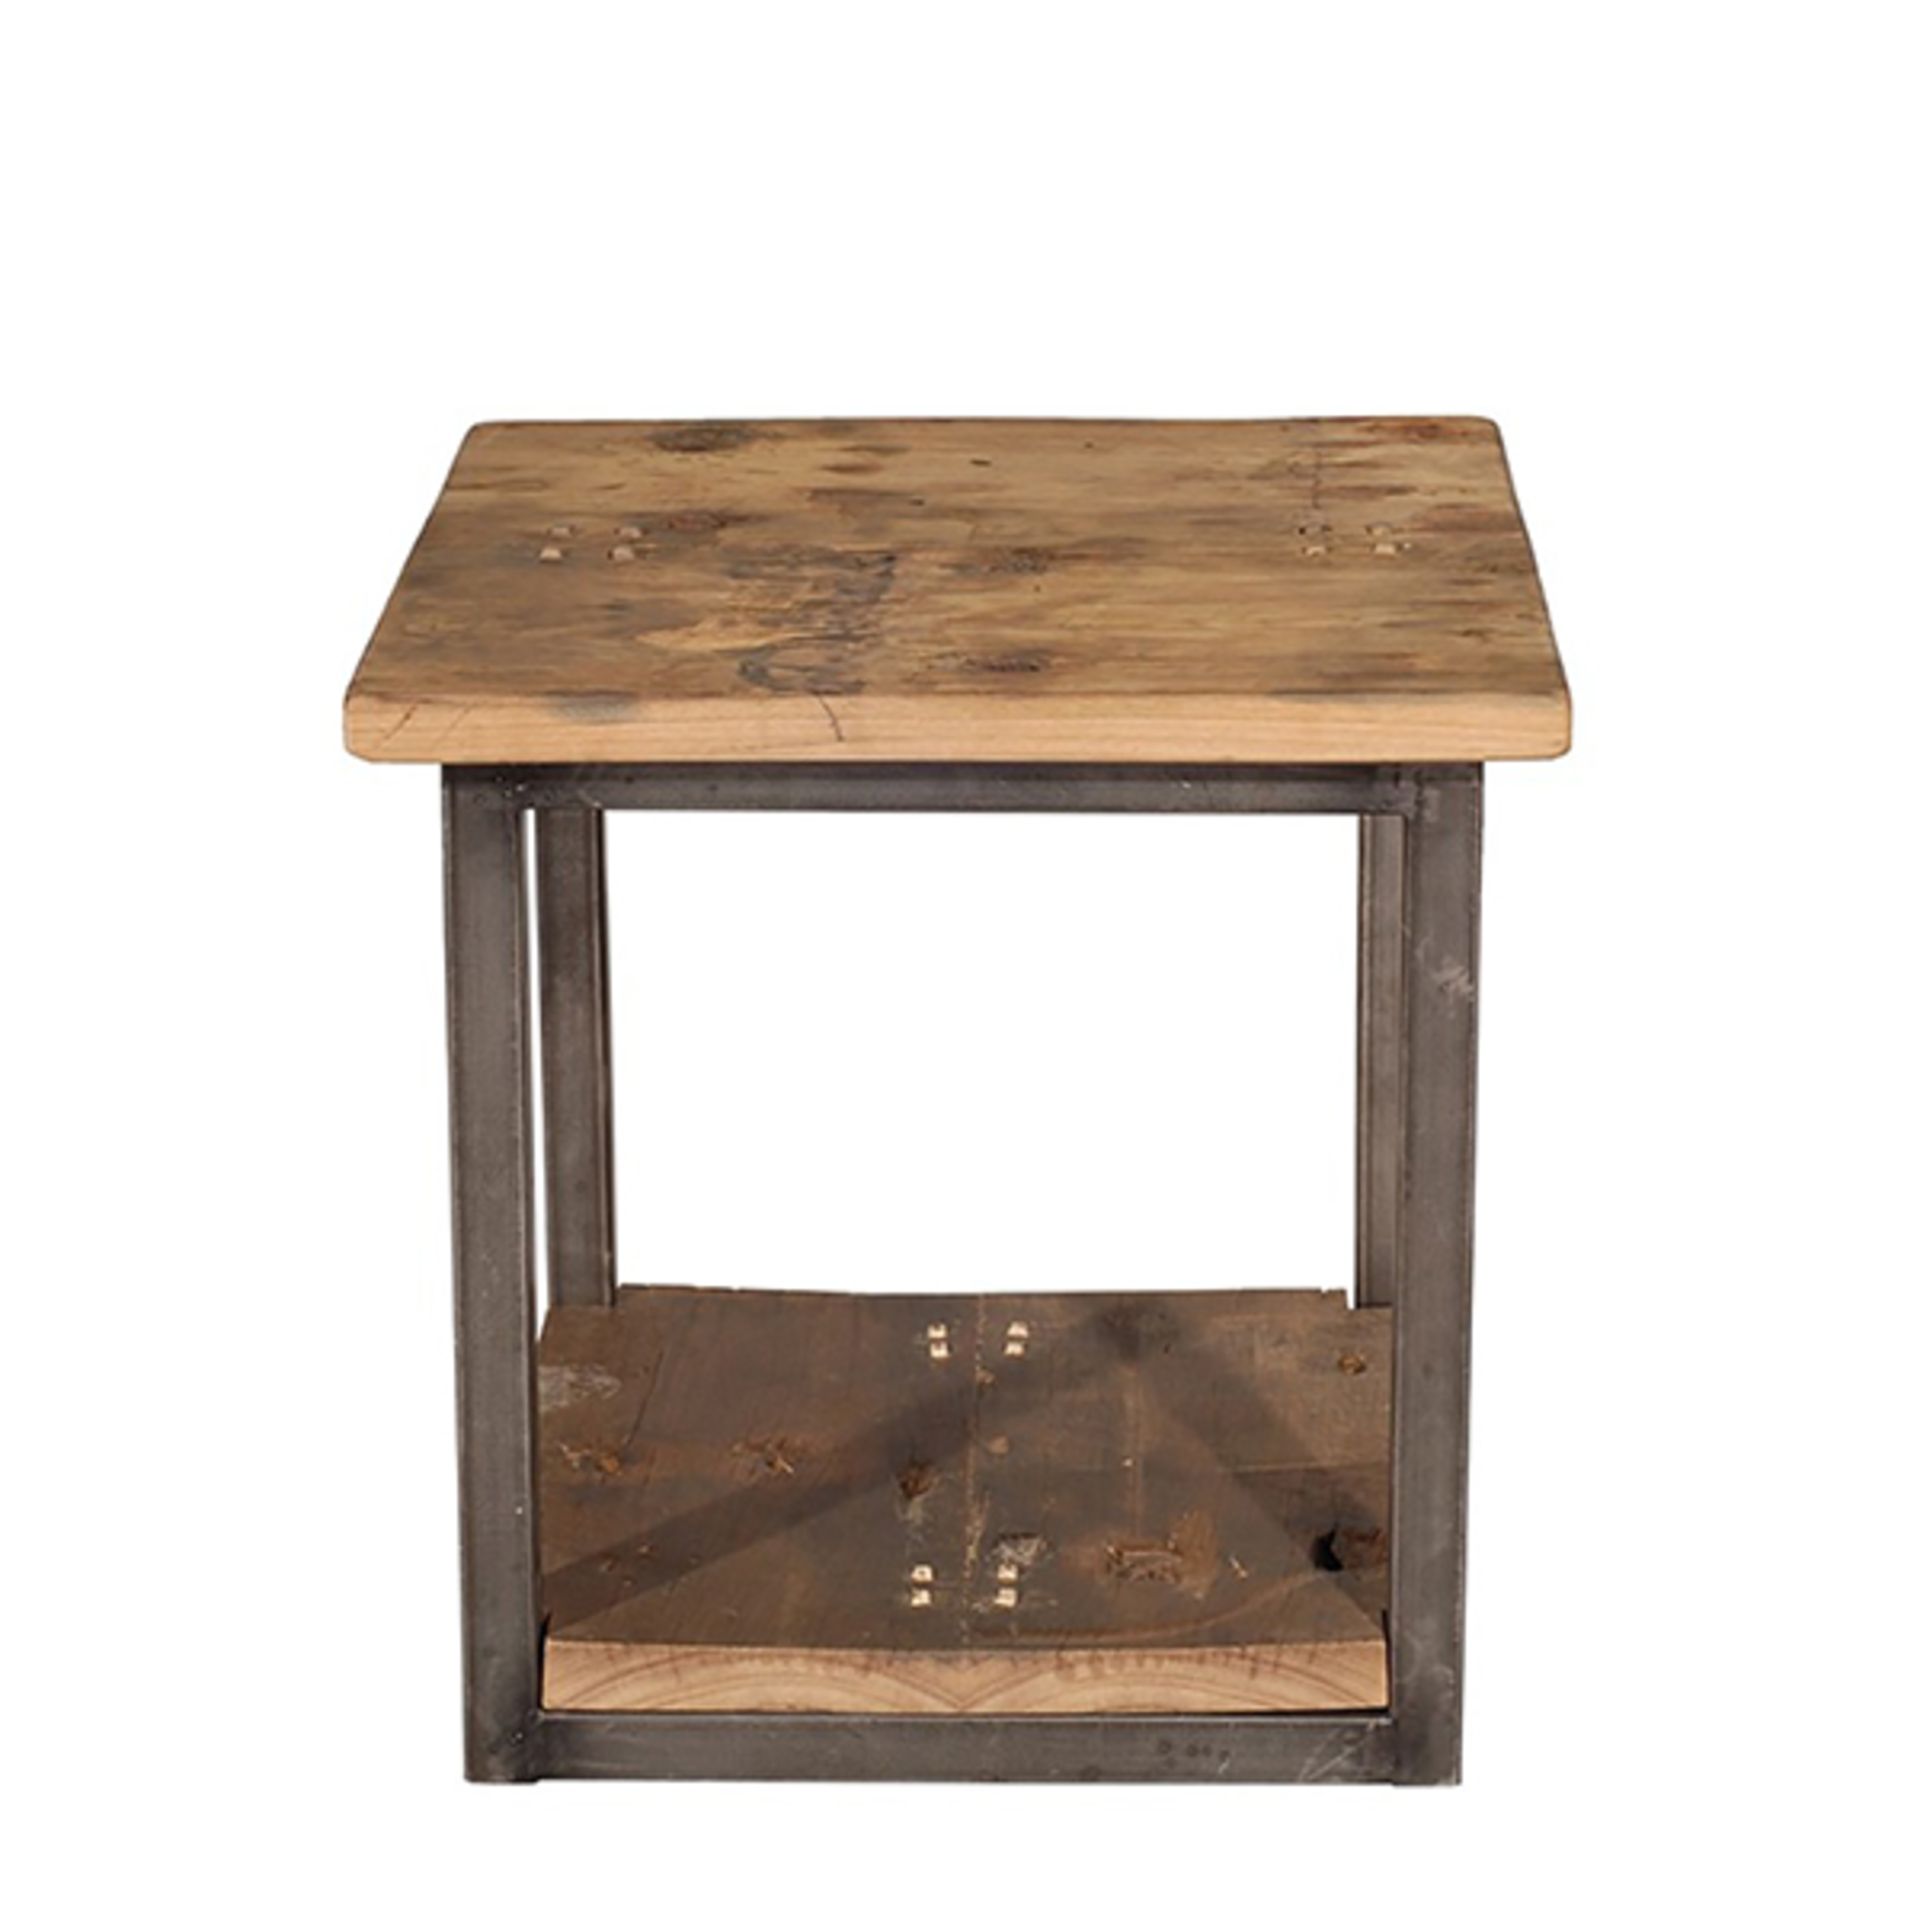 Axel Lamp Table Natural Genuine Reclaimed Vintage Boat Wood Natural 60 X 60 X 60cm The Designers